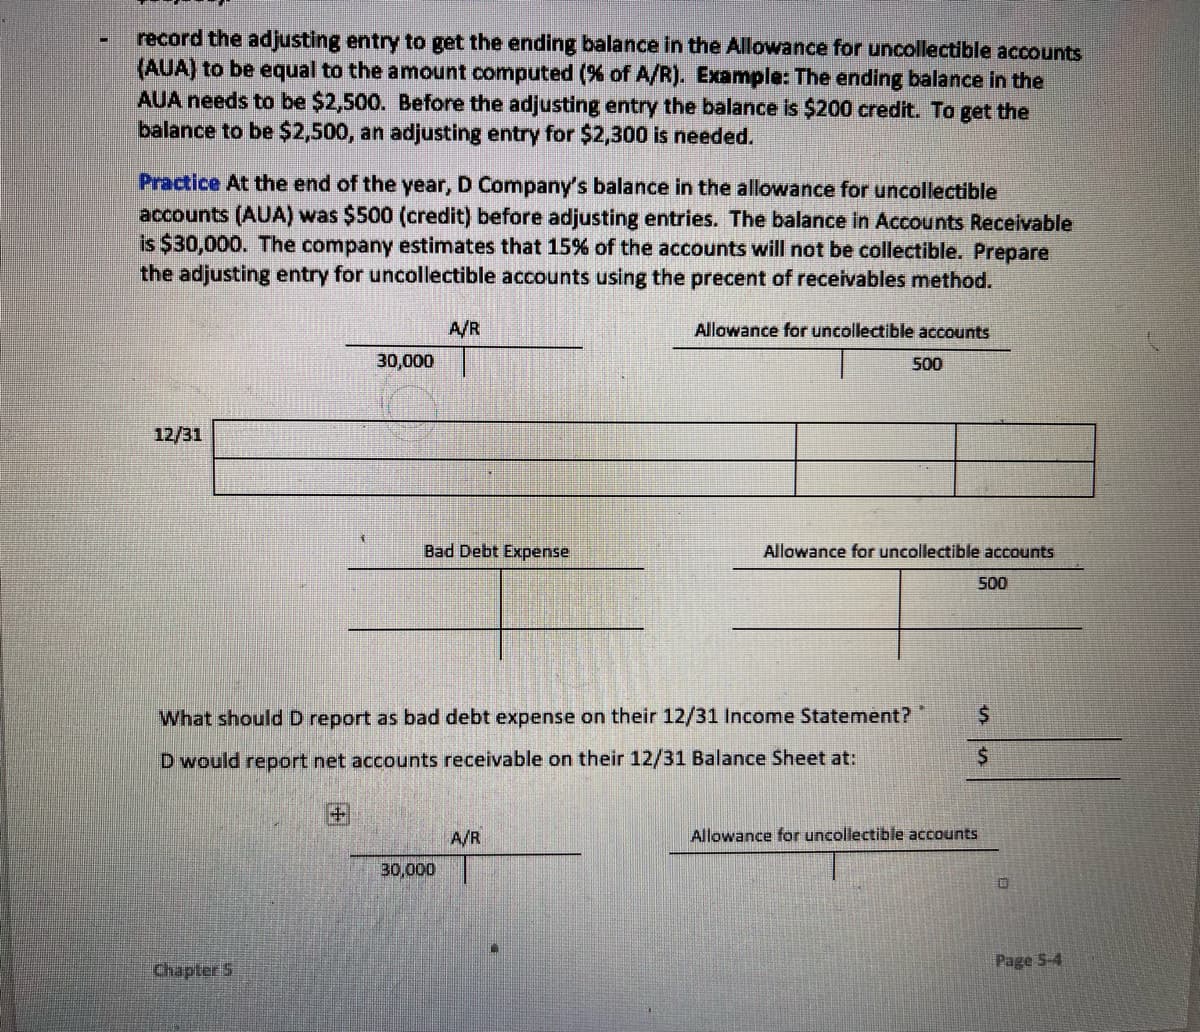 record the adjusting entry to get the ending balance in the Allowance for uncollectible accounts
(AUA) to be equal to the amount computed (% of A/R). Example: The ending balance in the
AUA needs to be $2,500. Before the adjusting entry the balance is $200 credit. To get the
balance to be $2,500, an adjusting entry for $2,300 is needed.
Practice At the end of the year, D Company's balance in the allowance for uncollectible
accounts (AUA) was $500 (credit) before adjusting entries. The balance in Accounts Receilvable
is $30,000. The company estimates that 15% of the accounts will not be collectible. Prepare
the adjusting entry for uncollectible accounts using the precent of receivables method.
A/R
Allowance for uncollectible accounts
30,000
500
12/31
Bad Debt Expense
Allowance for uncollectible accounts
500
What should D report as bad debt expense on their 12/31 Income Statement?
D would report net accounts receivable on their 12/31 Balance Sheet at:
A/R
Allowance for uncollectible accounts
30,000
Page 5-4
ChapterS
田
